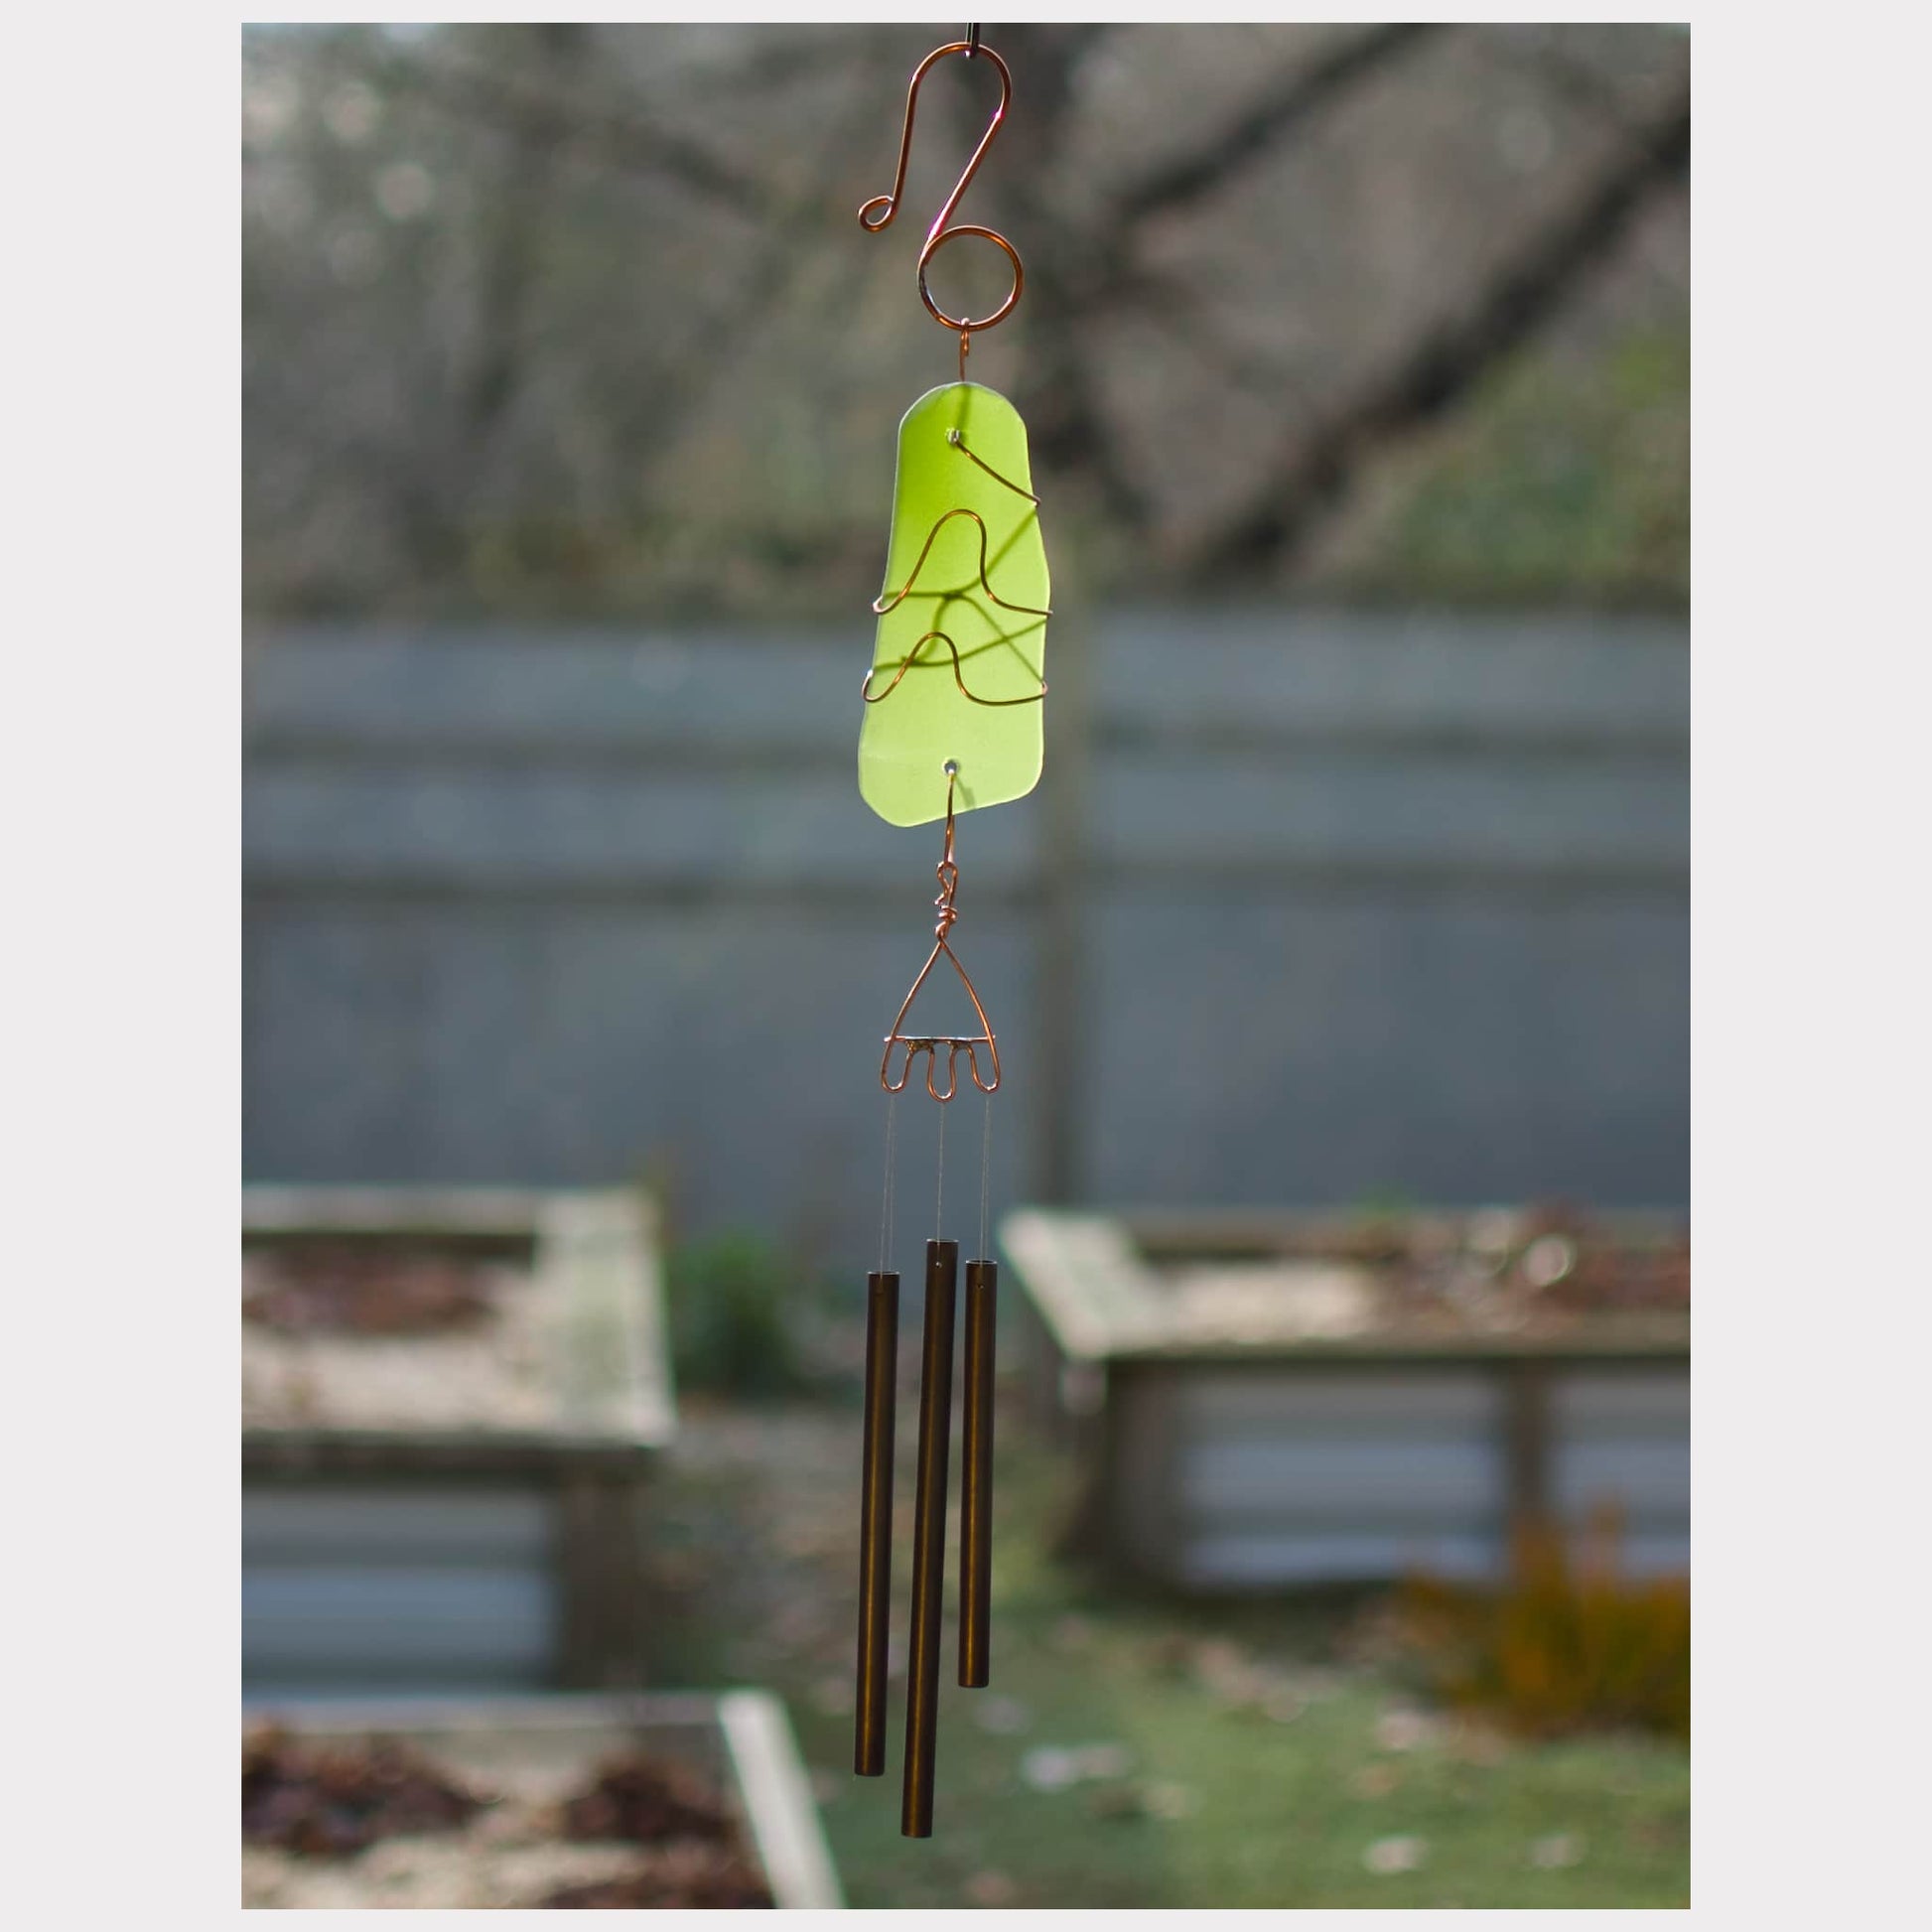 Sea glass handcrafted wind chime with three brass chimes.